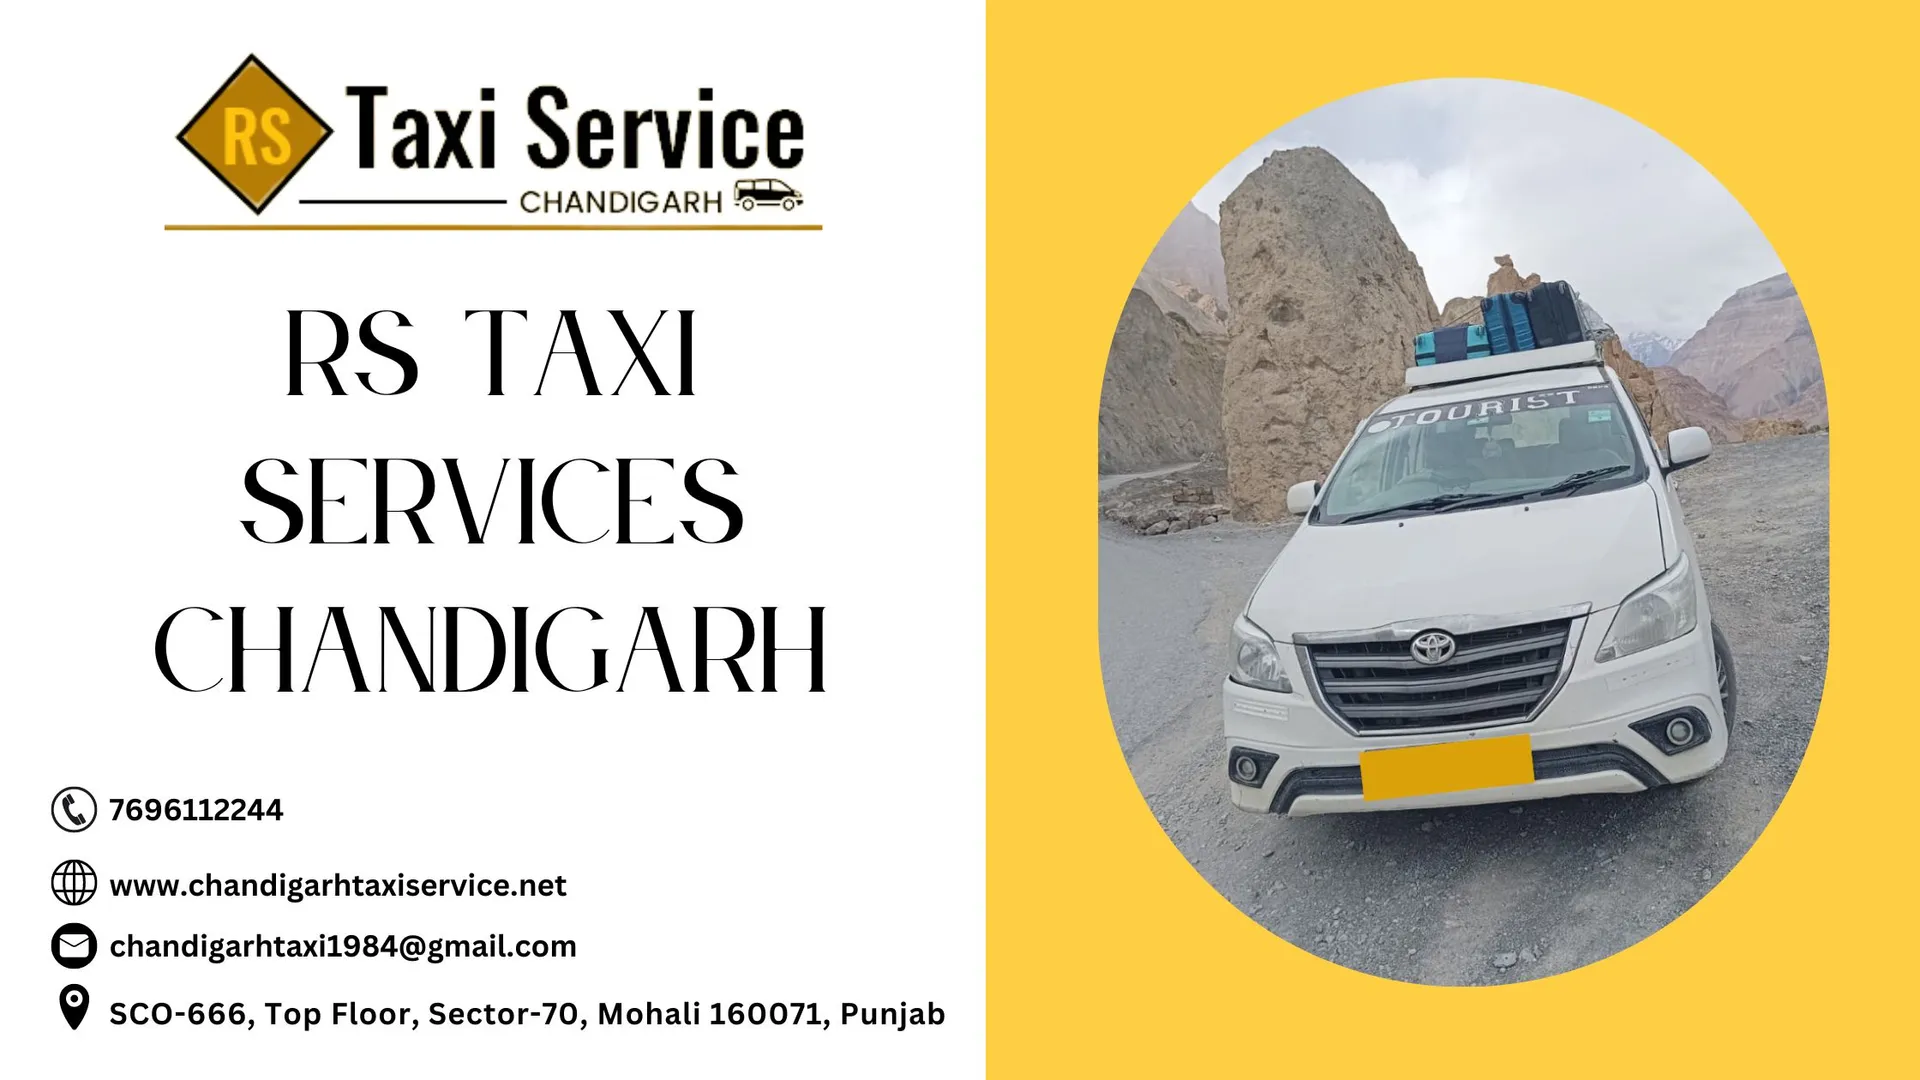 If you want to book a taxi, then you have come to the right place.

Welcome to RS Taxi Service Chandigarh! We are your trusted and professional provider of Chandigarh taxi services. Whether you need transportation within the city or to nearby areas, our taxi service in Chandigarh is at your service.

With RS Taxi Service Chandigarh, you can expect a seamless and stress-free experience. Our fleet of well-maintained vehicles, driven by skilled and courteous drivers, ensures a comfortable journey every time. Punctuality is our priority, and we take pride in getting you to your destination on time.

Booking a taxi with us is easy and convenient, thanks to our user-friendly online platform. Experience affordable rates without compromising on quality service. Our commitment to customer satisfaction sets us apart as one of the best taxi services in Chandigarh.

For reliable and efficient transportation, choose RS Taxi Service Chandigarh. Let us be your travel partner, making your journeys in and around Chandigarh enjoyable and memorable. Book your ride now! https://www.chandigarhtaxiservice.net/

Contact Person Name:- Ravi Salaria

Contact no. 7696112244

Address:- SCO-666, Top Floor, Sector-70, Mohali 160071, Punjab